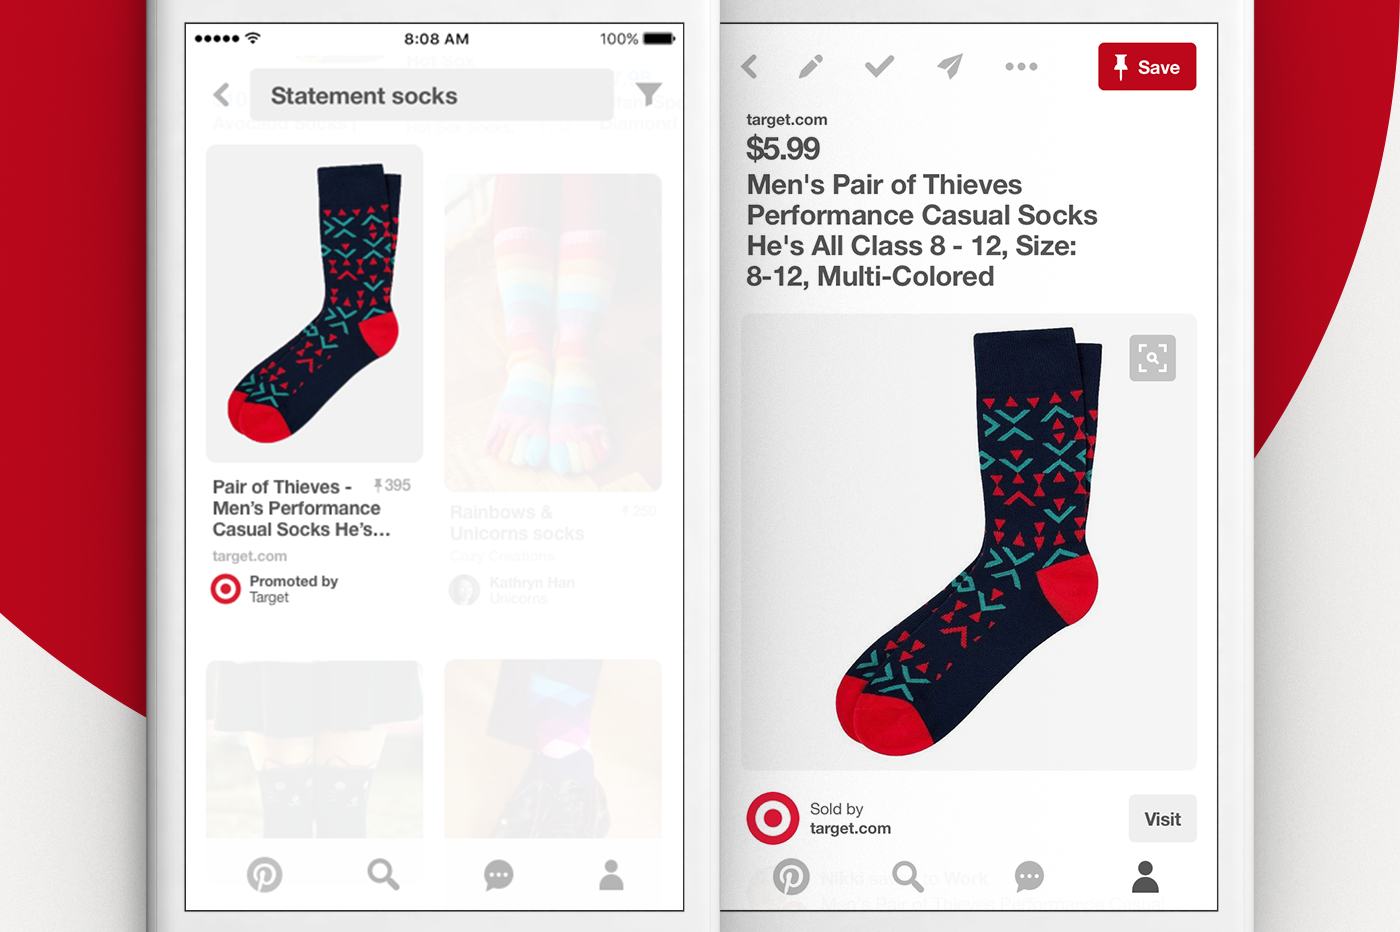 How To Use A Business Pinterest Account For Marketing